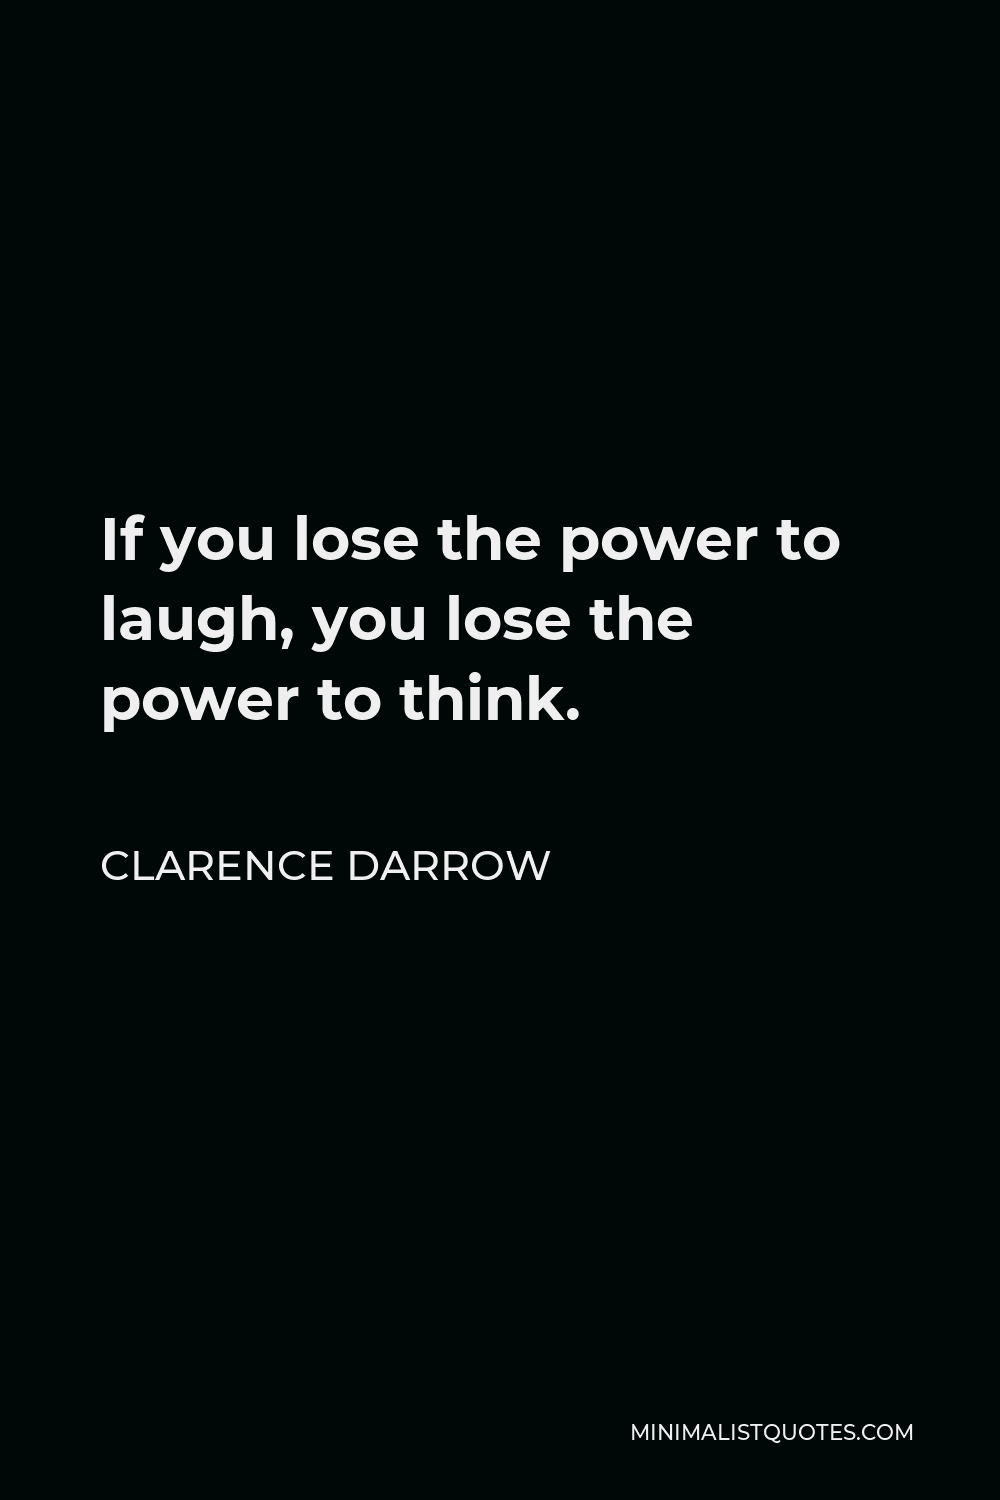 Clarence Darrow Quote - If you lose the power to laugh, you lose the power to think.